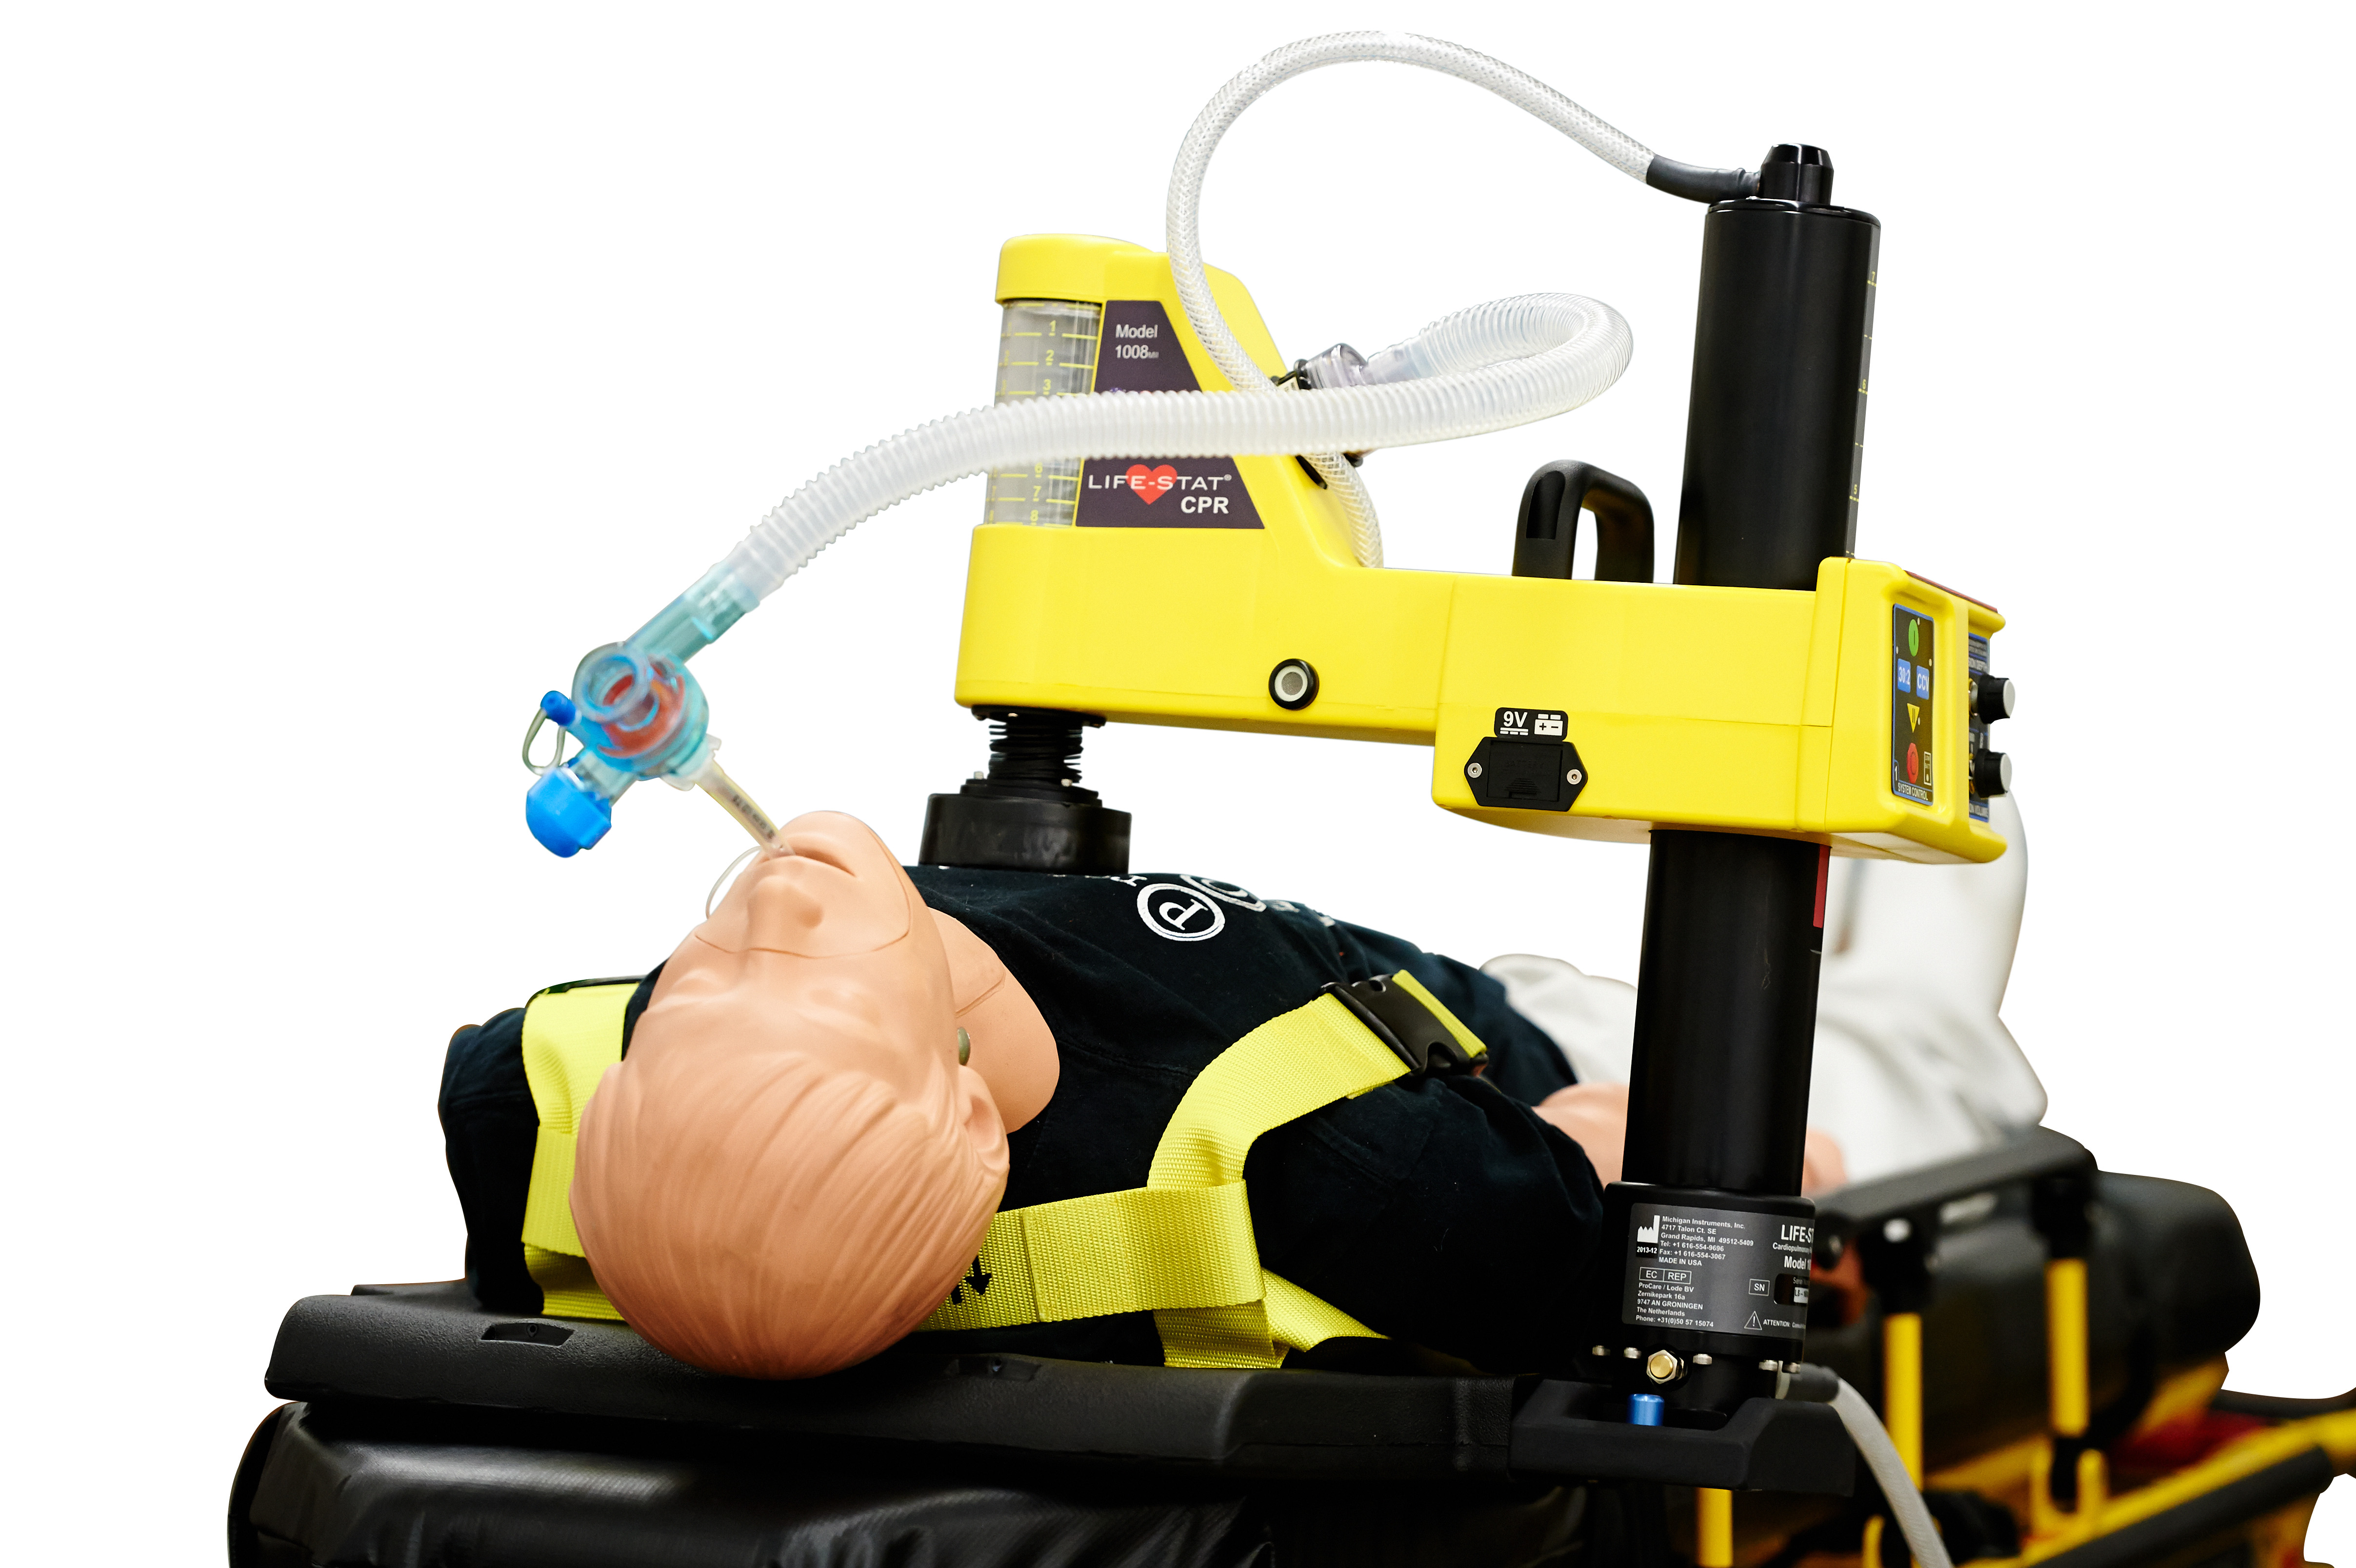 Life-Stat Mechanical CPR machine on CPR dummy